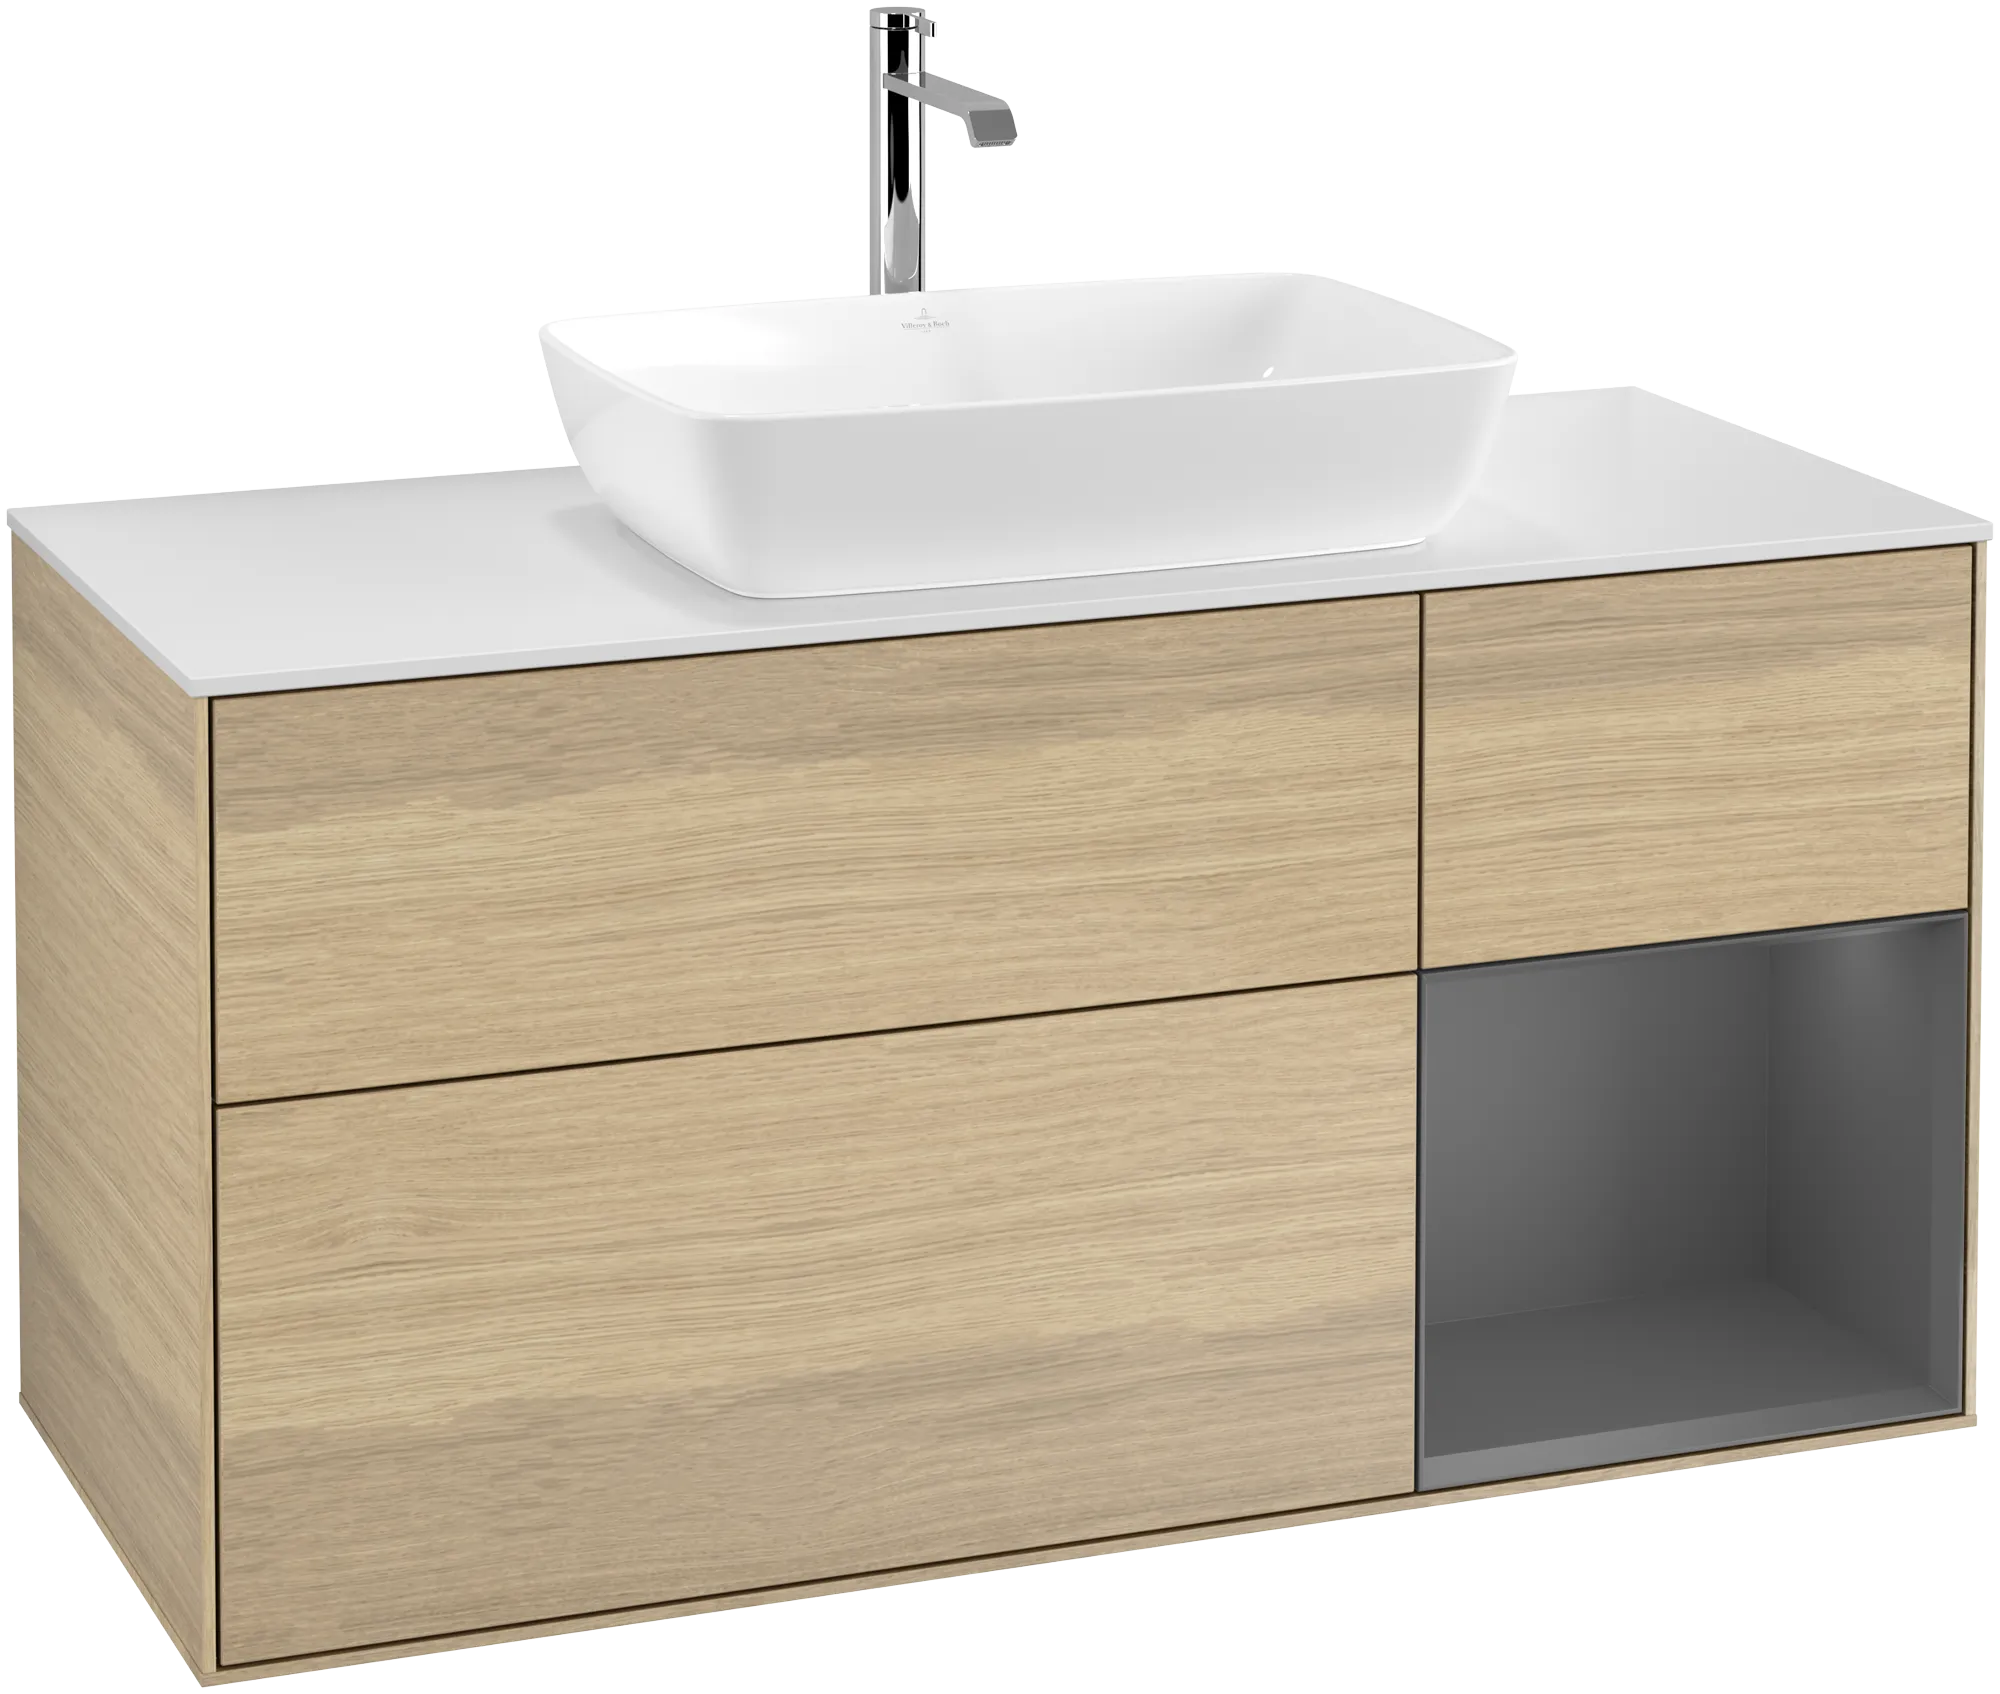 VILLEROY BOCH Finion Vanity unit, with lighting, 3 pull-out compartments, 1200 x 603 x 501 mm, Oak Veneer / Anthracite Matt Lacquer / Glass White Matt #G831GKPC resmi